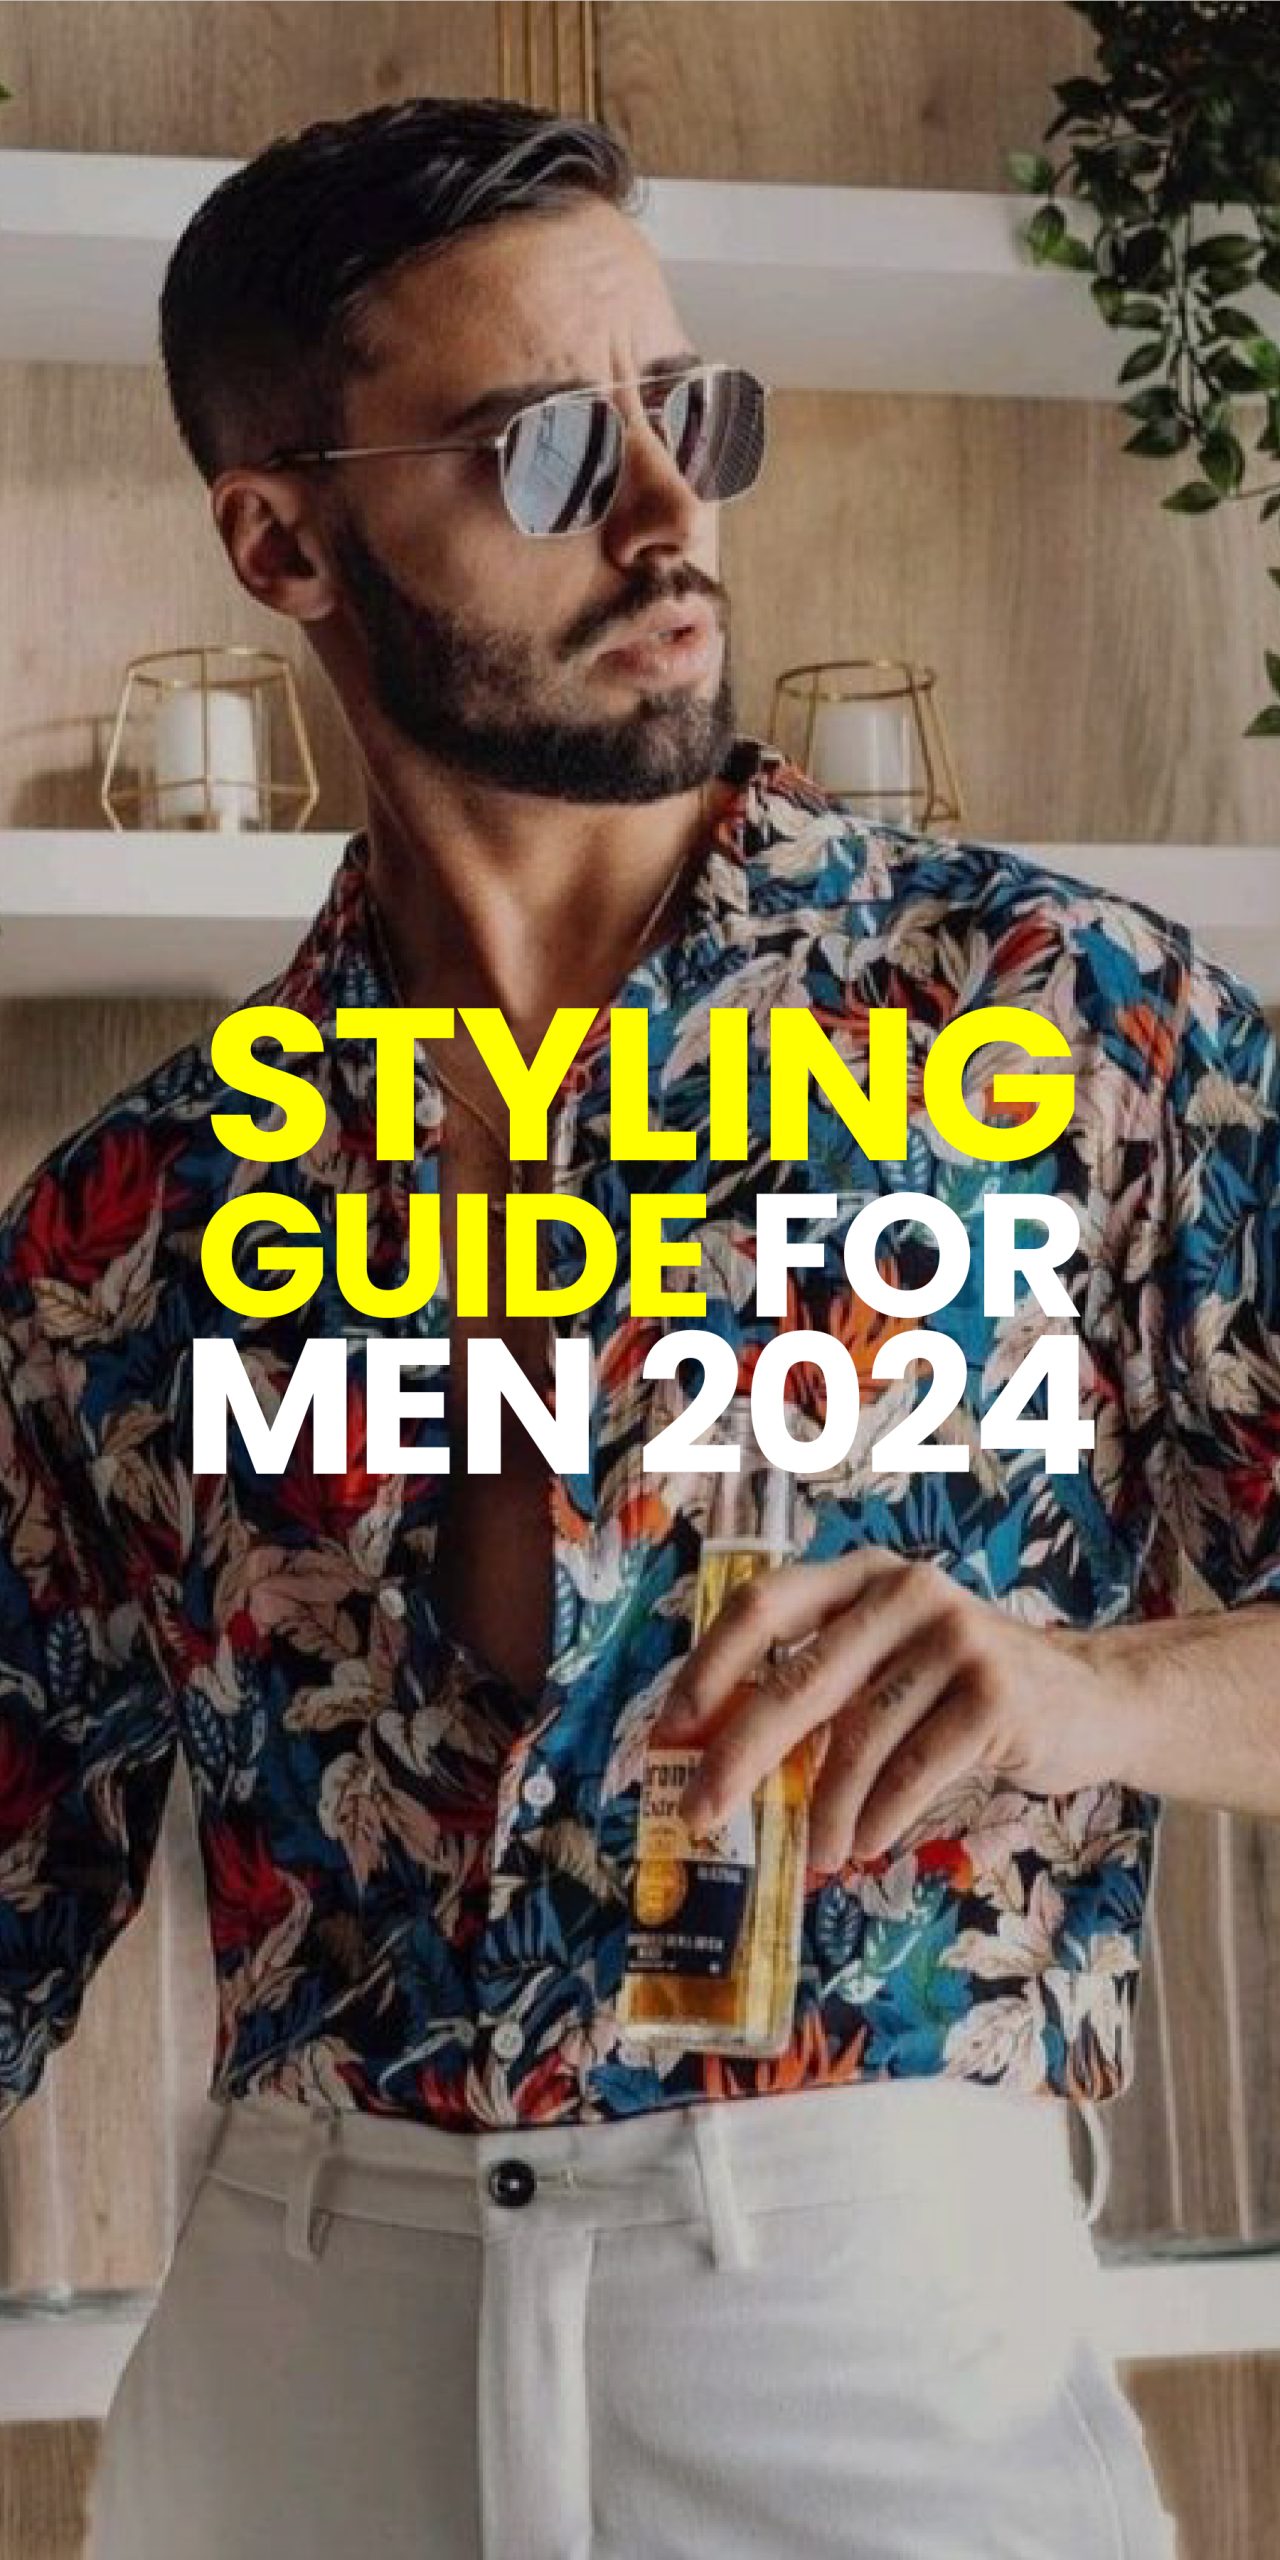 STYLING GUIDE FOR MEN 2024